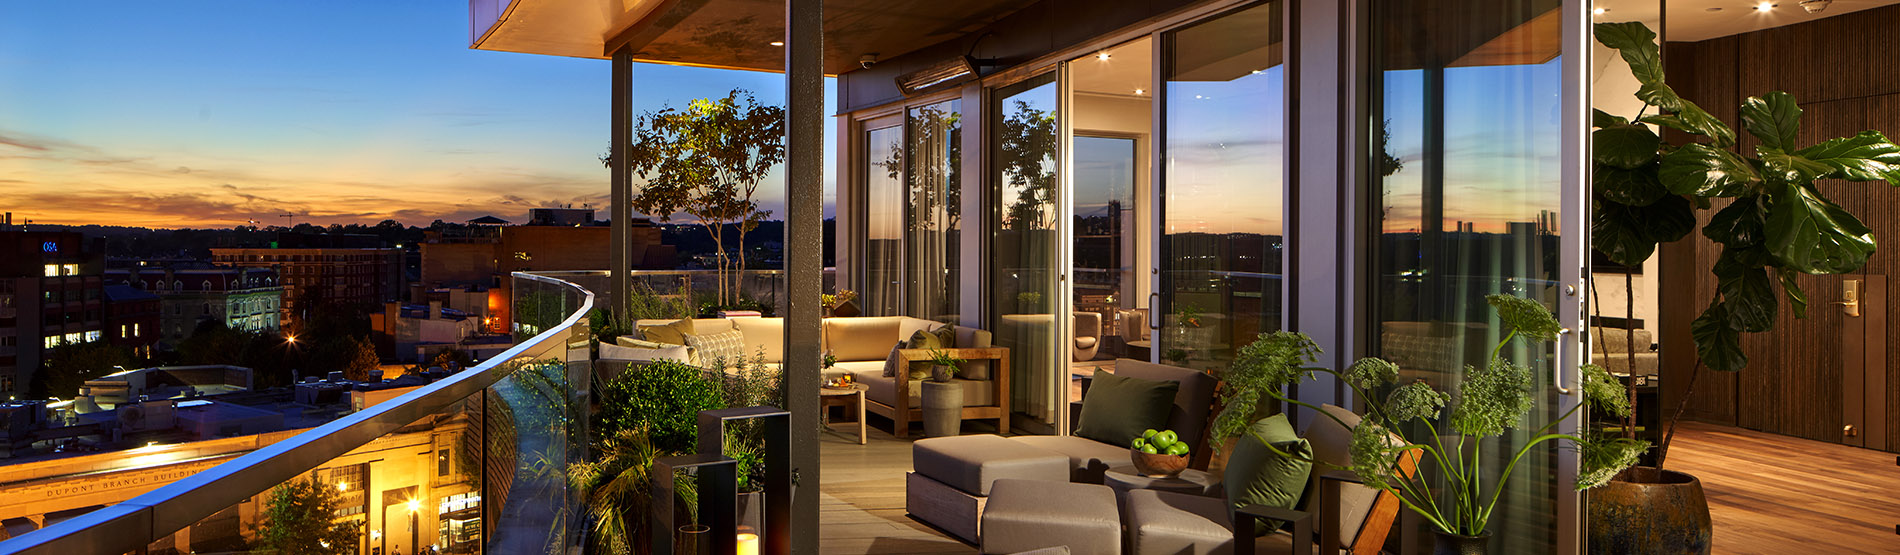 Large outdoor terrace overlooking city at dusk